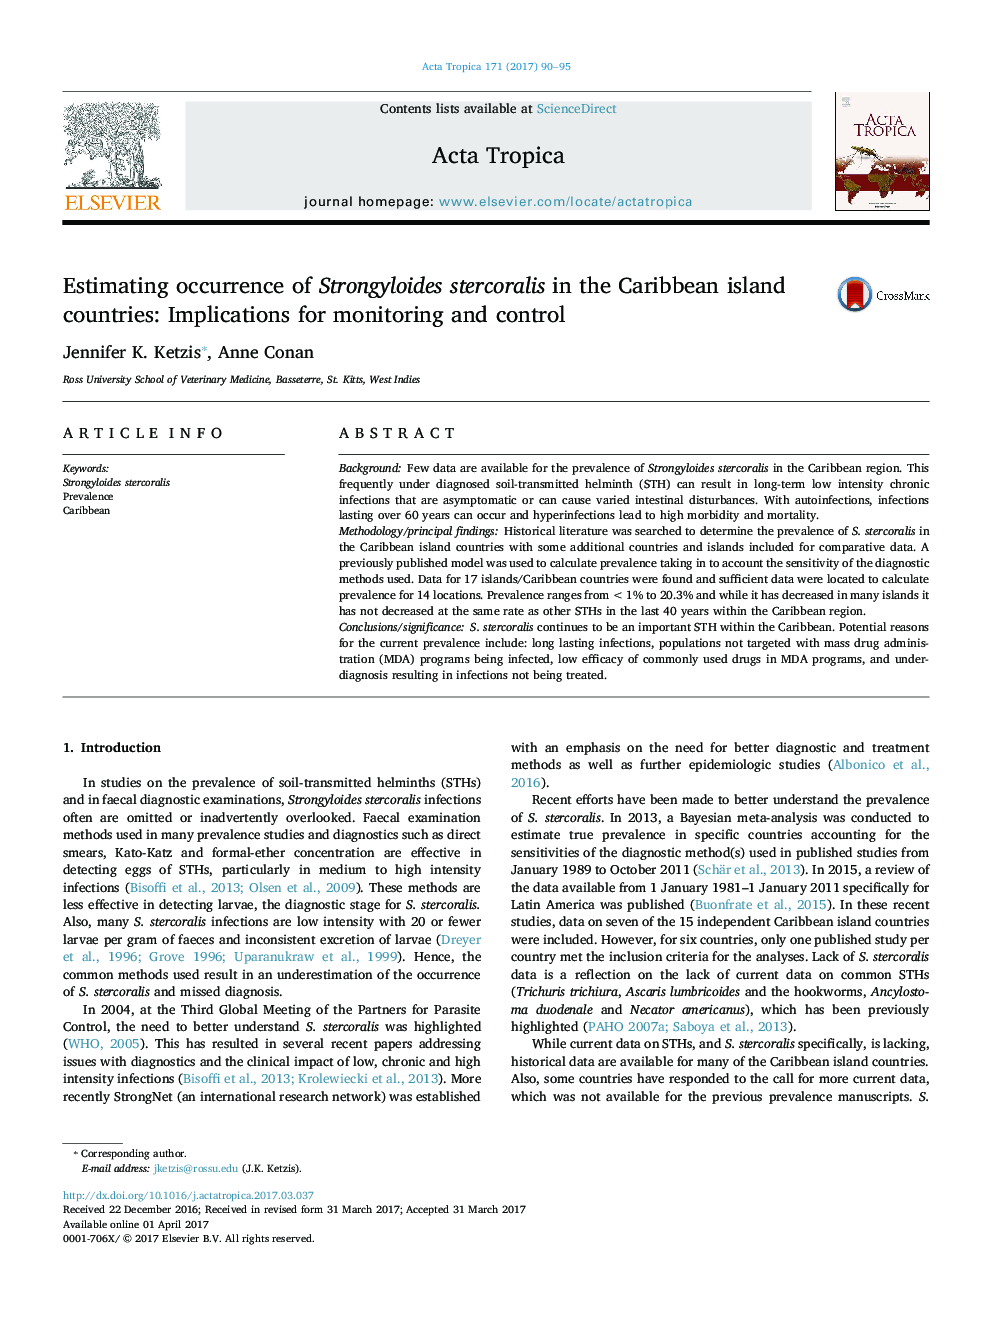 Estimating occurrence of Strongyloides stercoralis in the Caribbean island countries: Implications for monitoring and control